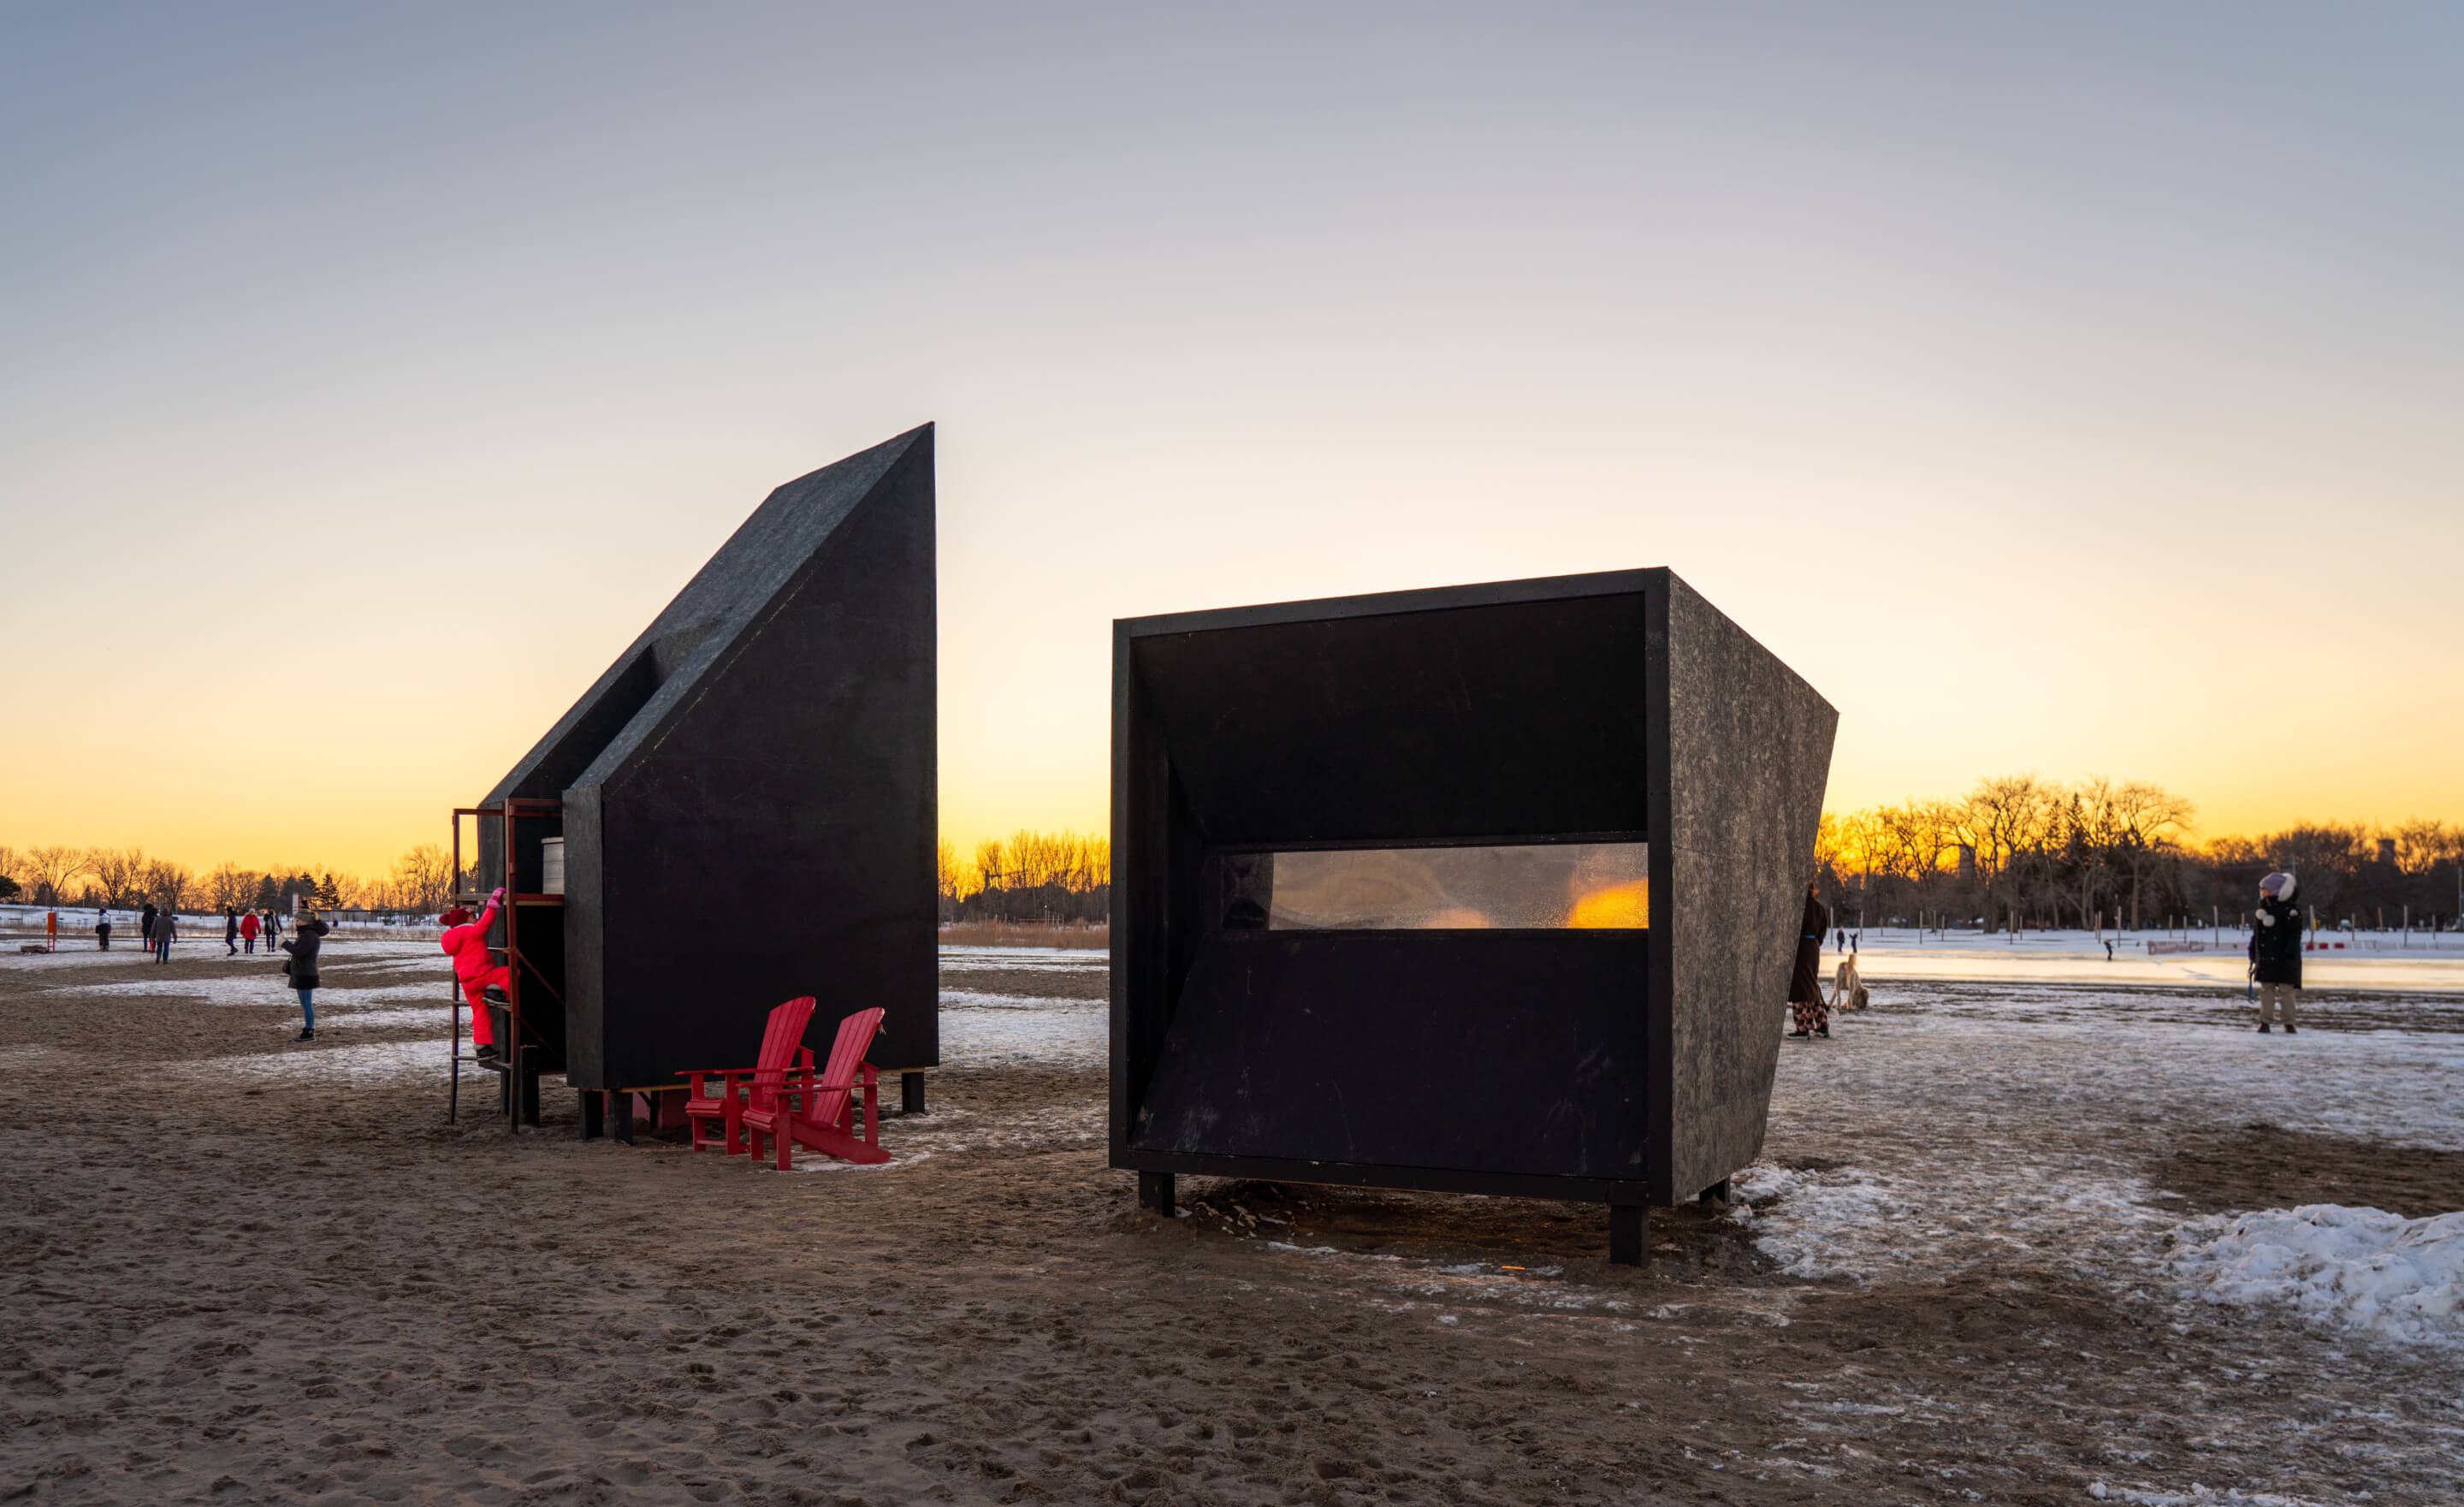 angular black beachfront pavilions flanked by red chairs